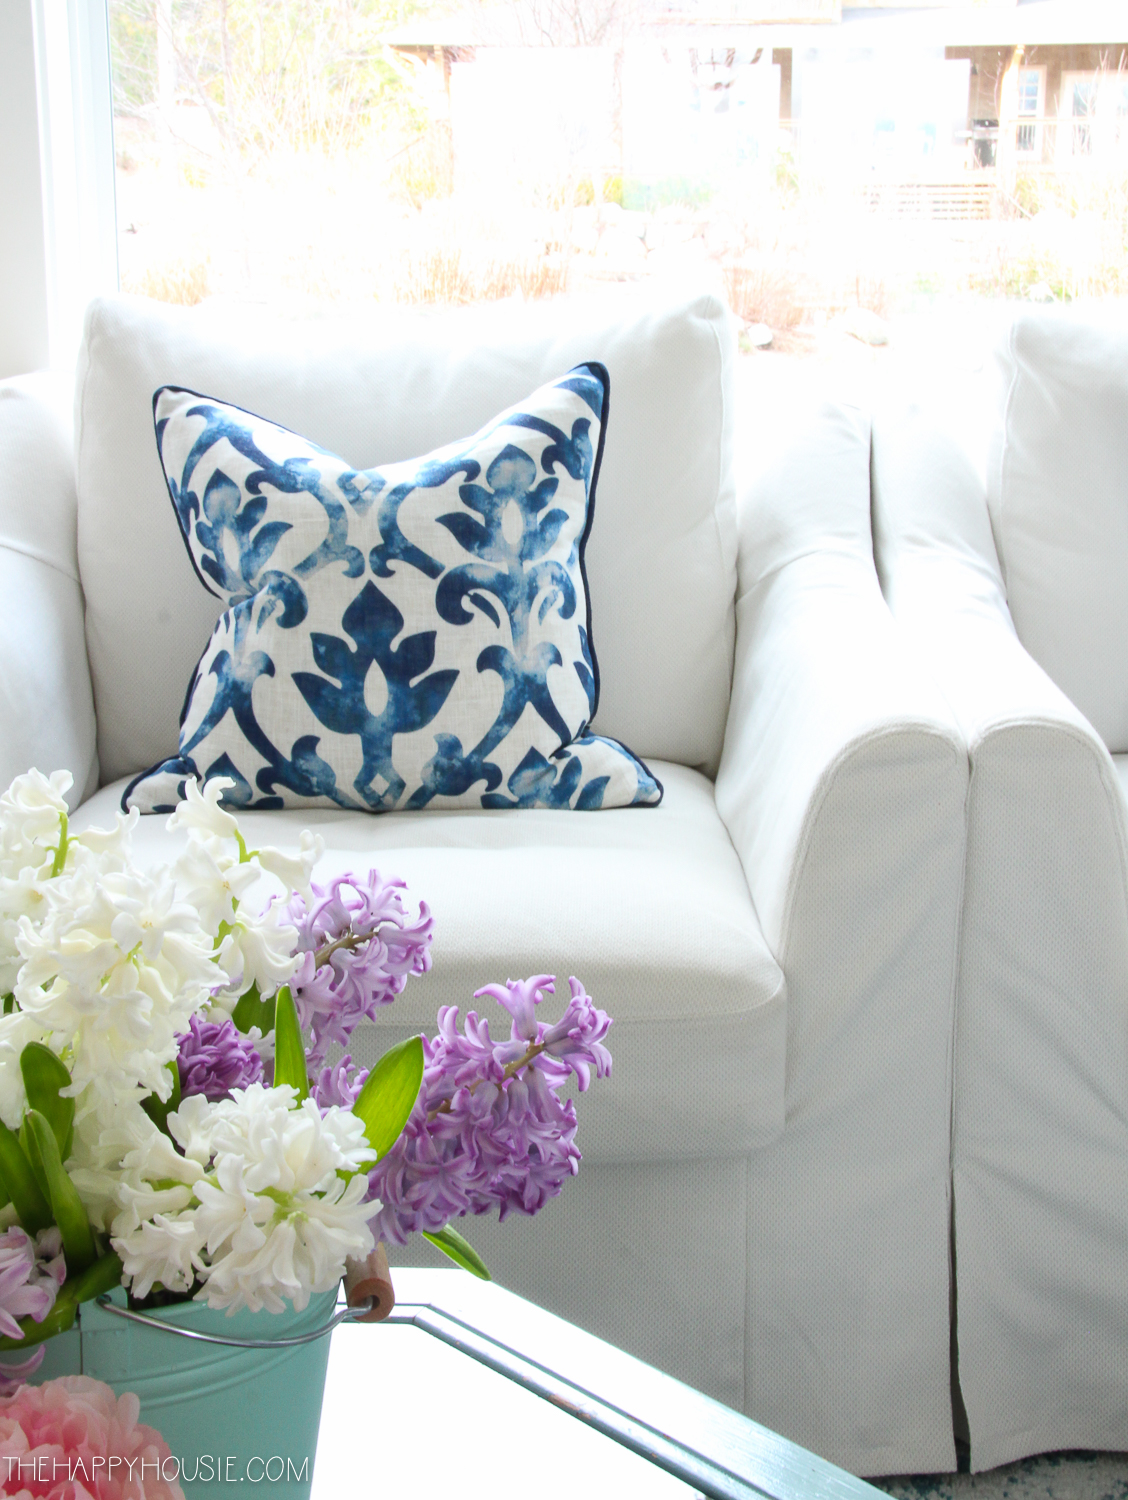 A blue and white throw pillow on a white armchair.